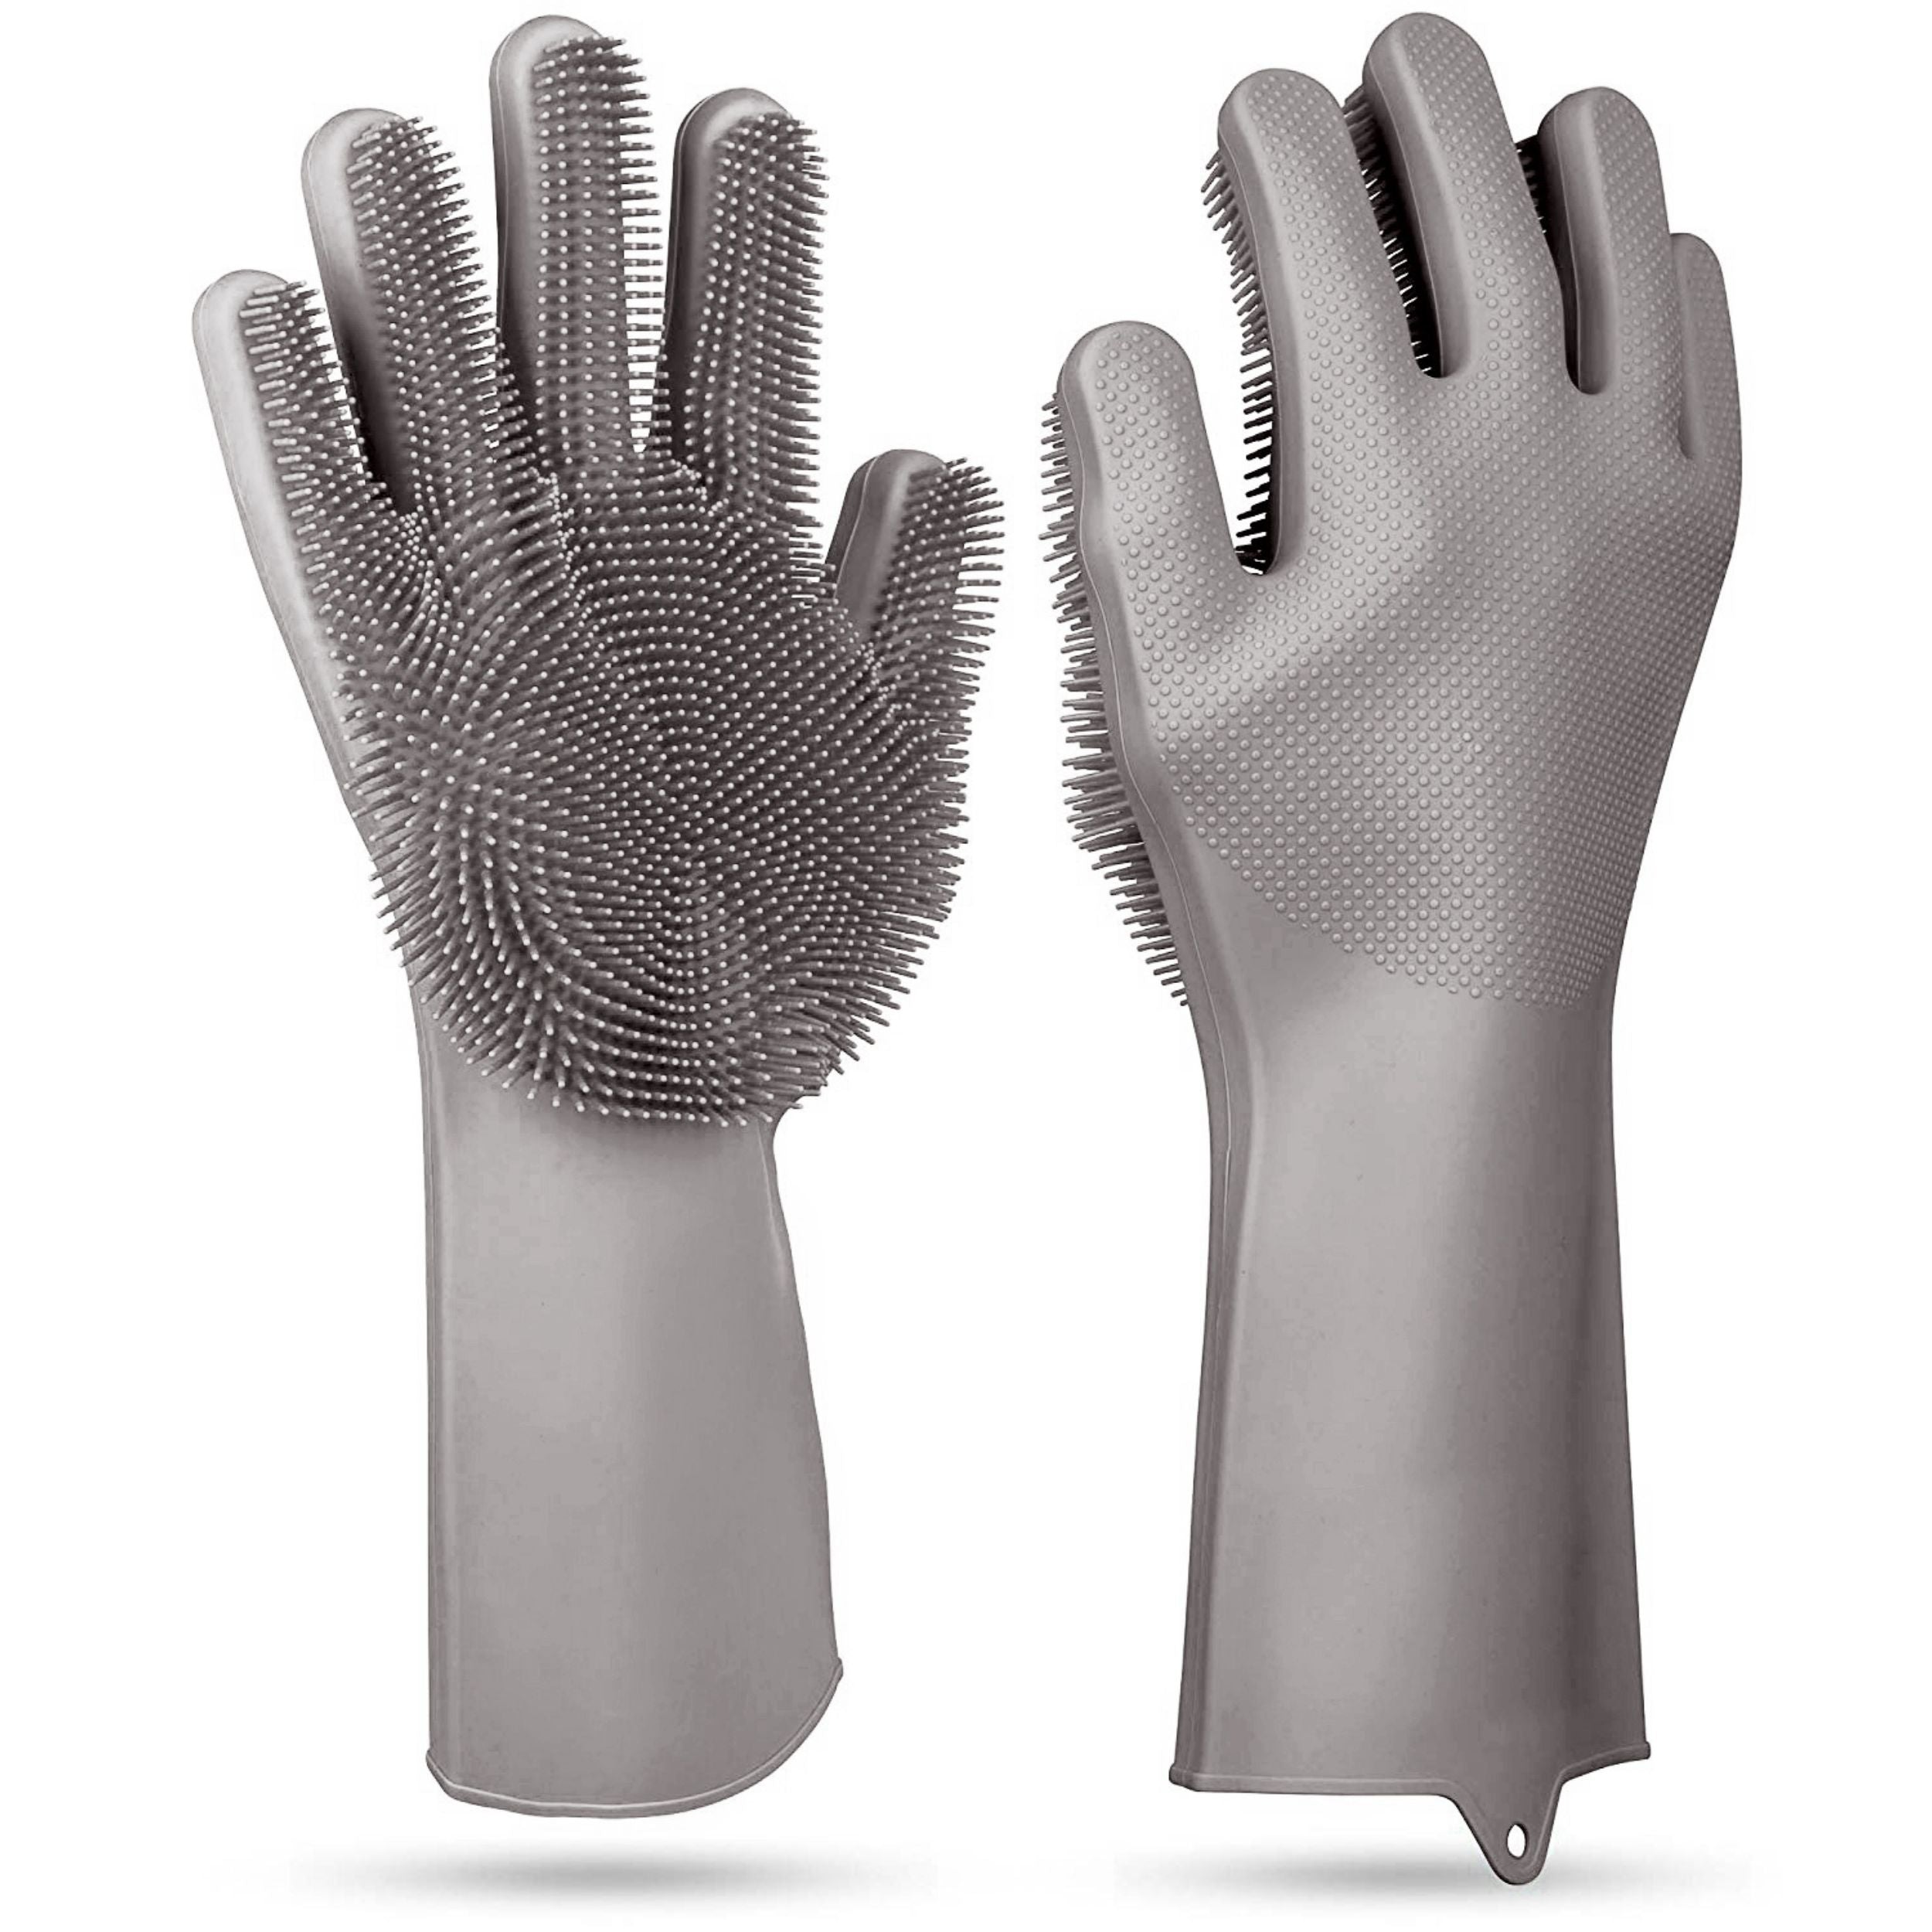 title:1 Pair Silicone Dishwashing Gloves | Cleaning Sponge Scrubber | Heat Resistant | Pet Safe | Wash Gloves;color:Gray